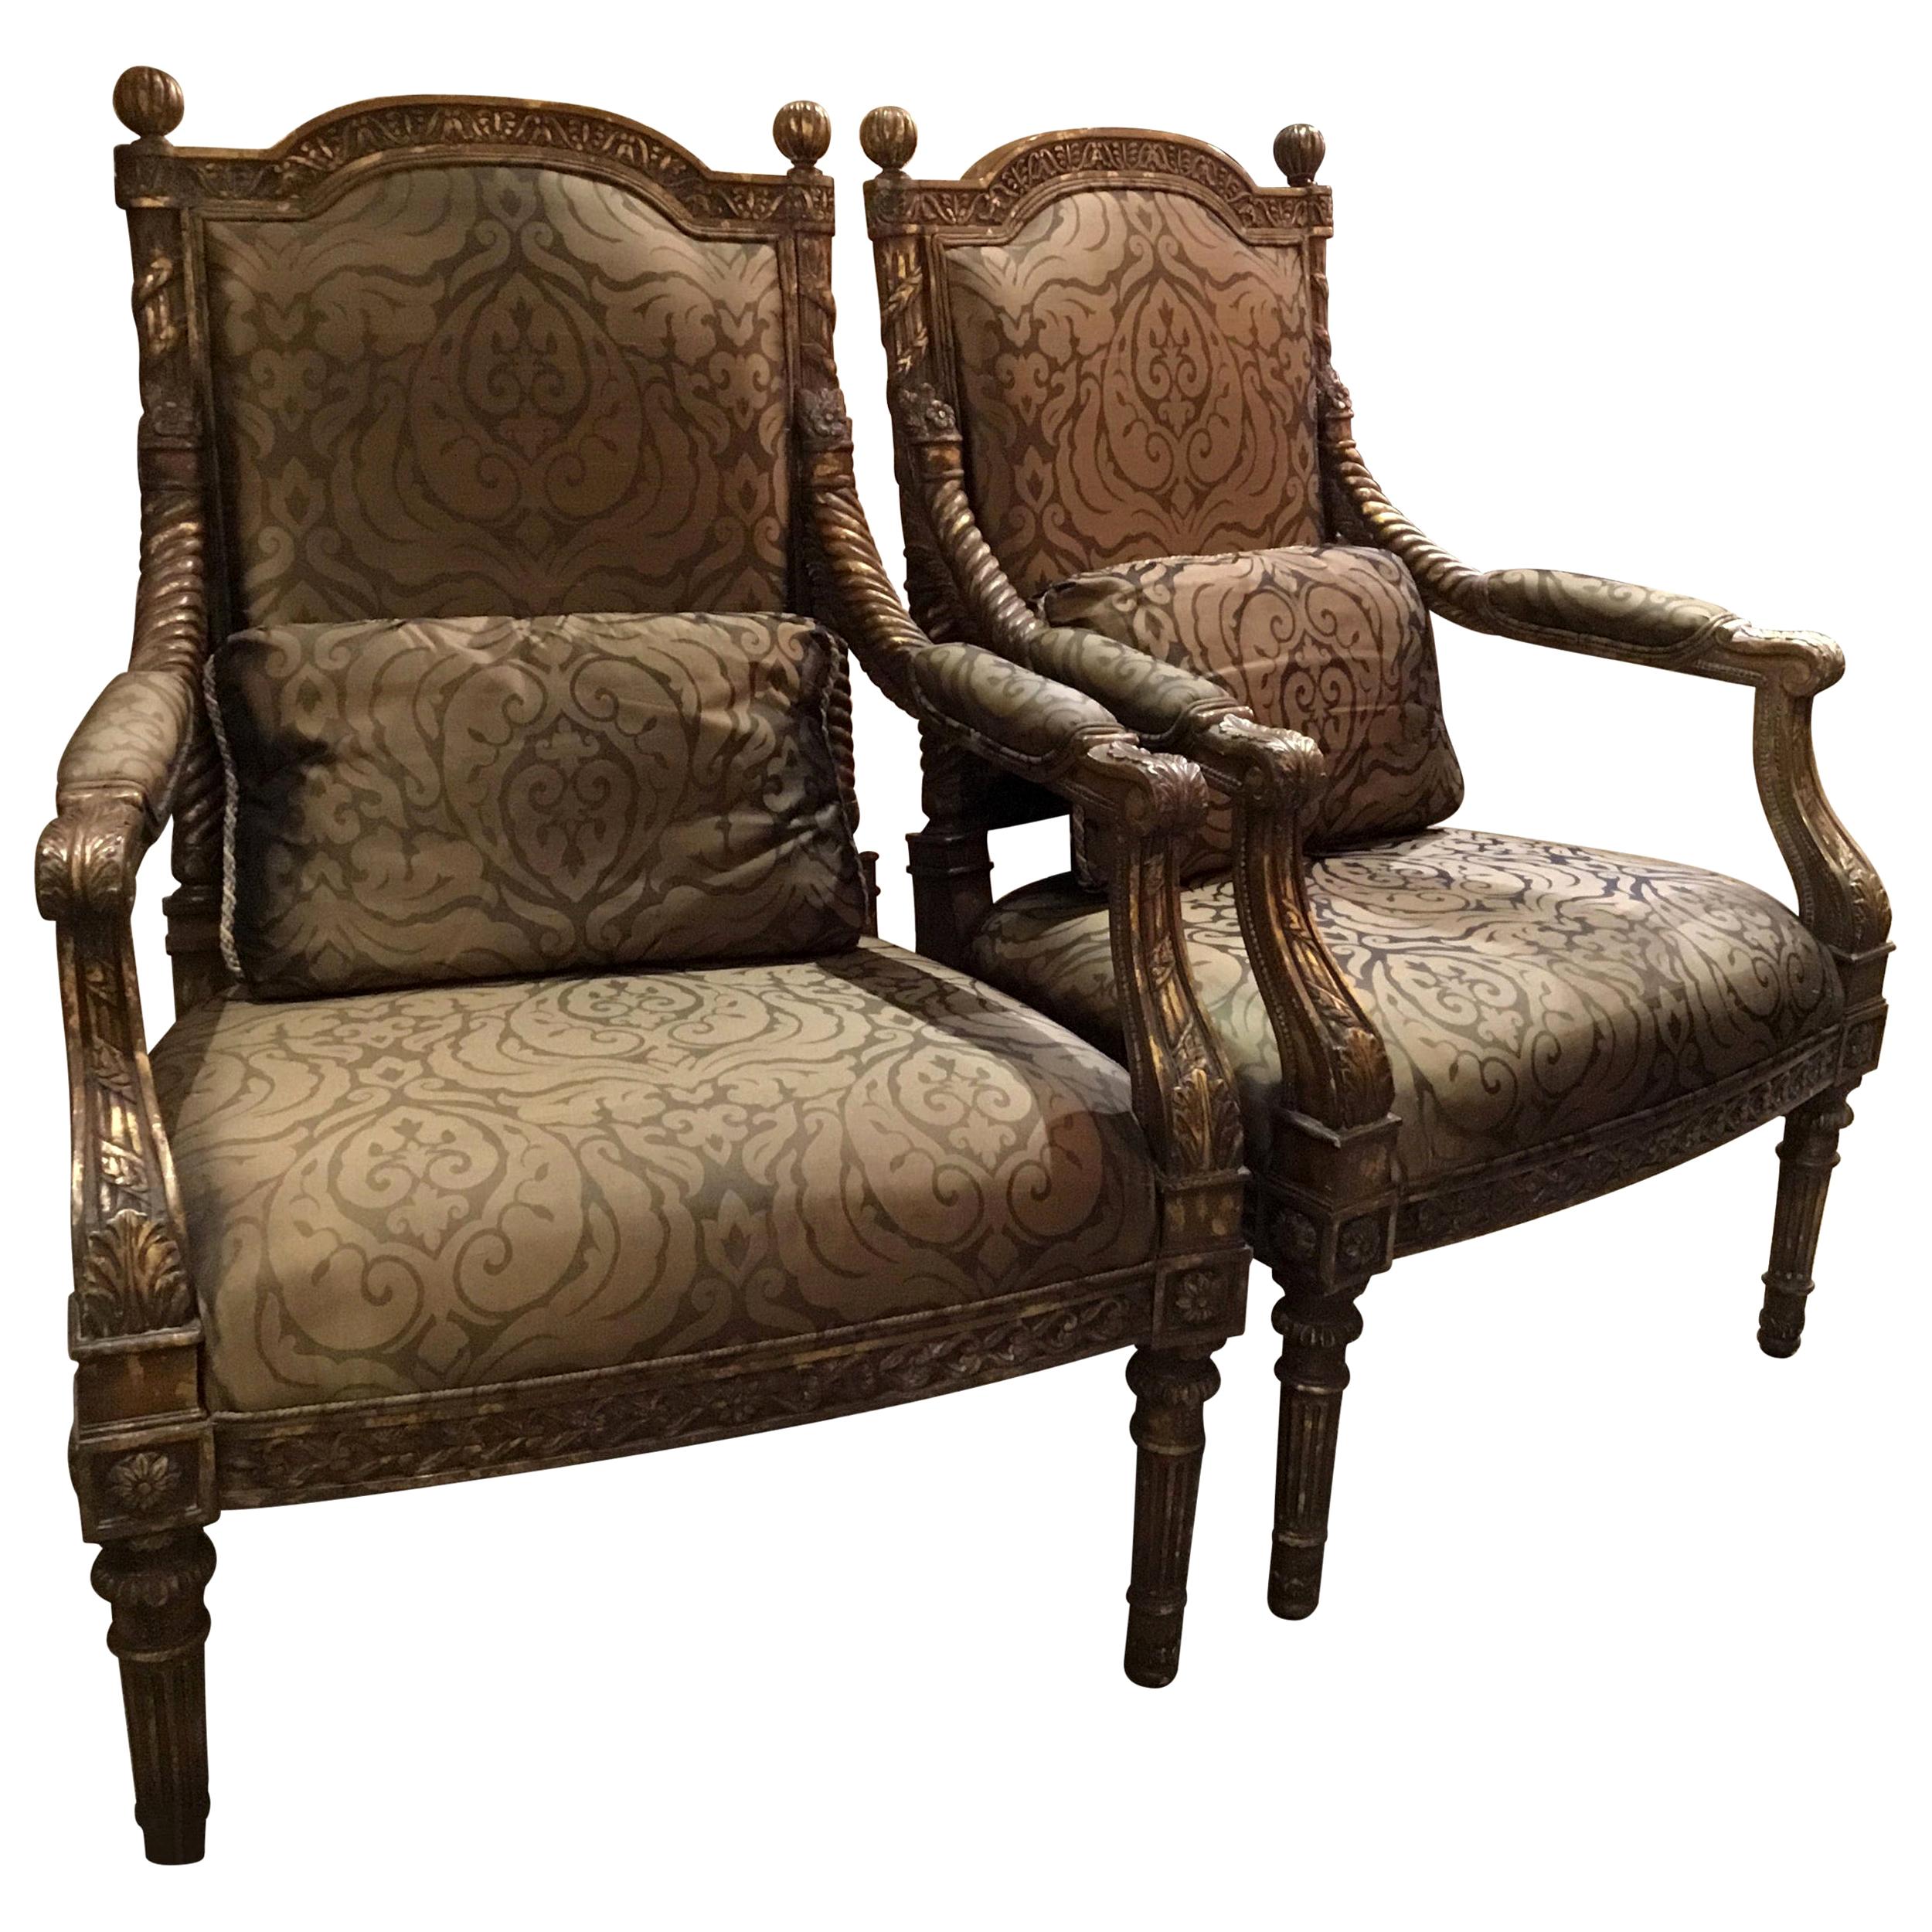 Pair of Louis XV style armchairs in carved wood, seat ga…